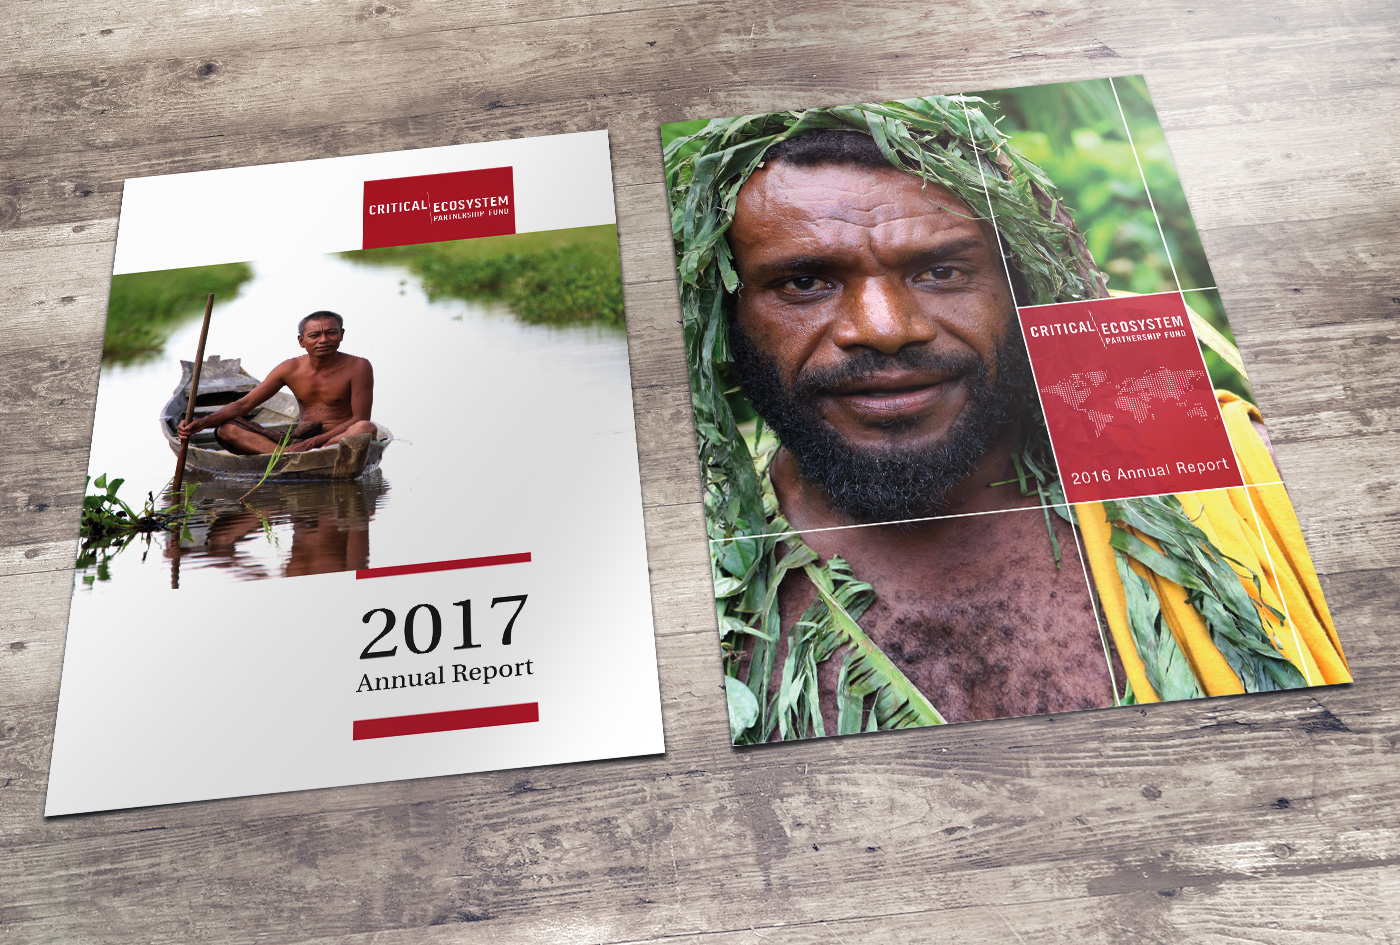 CEPF 2016 and 2017  Annual Report covers